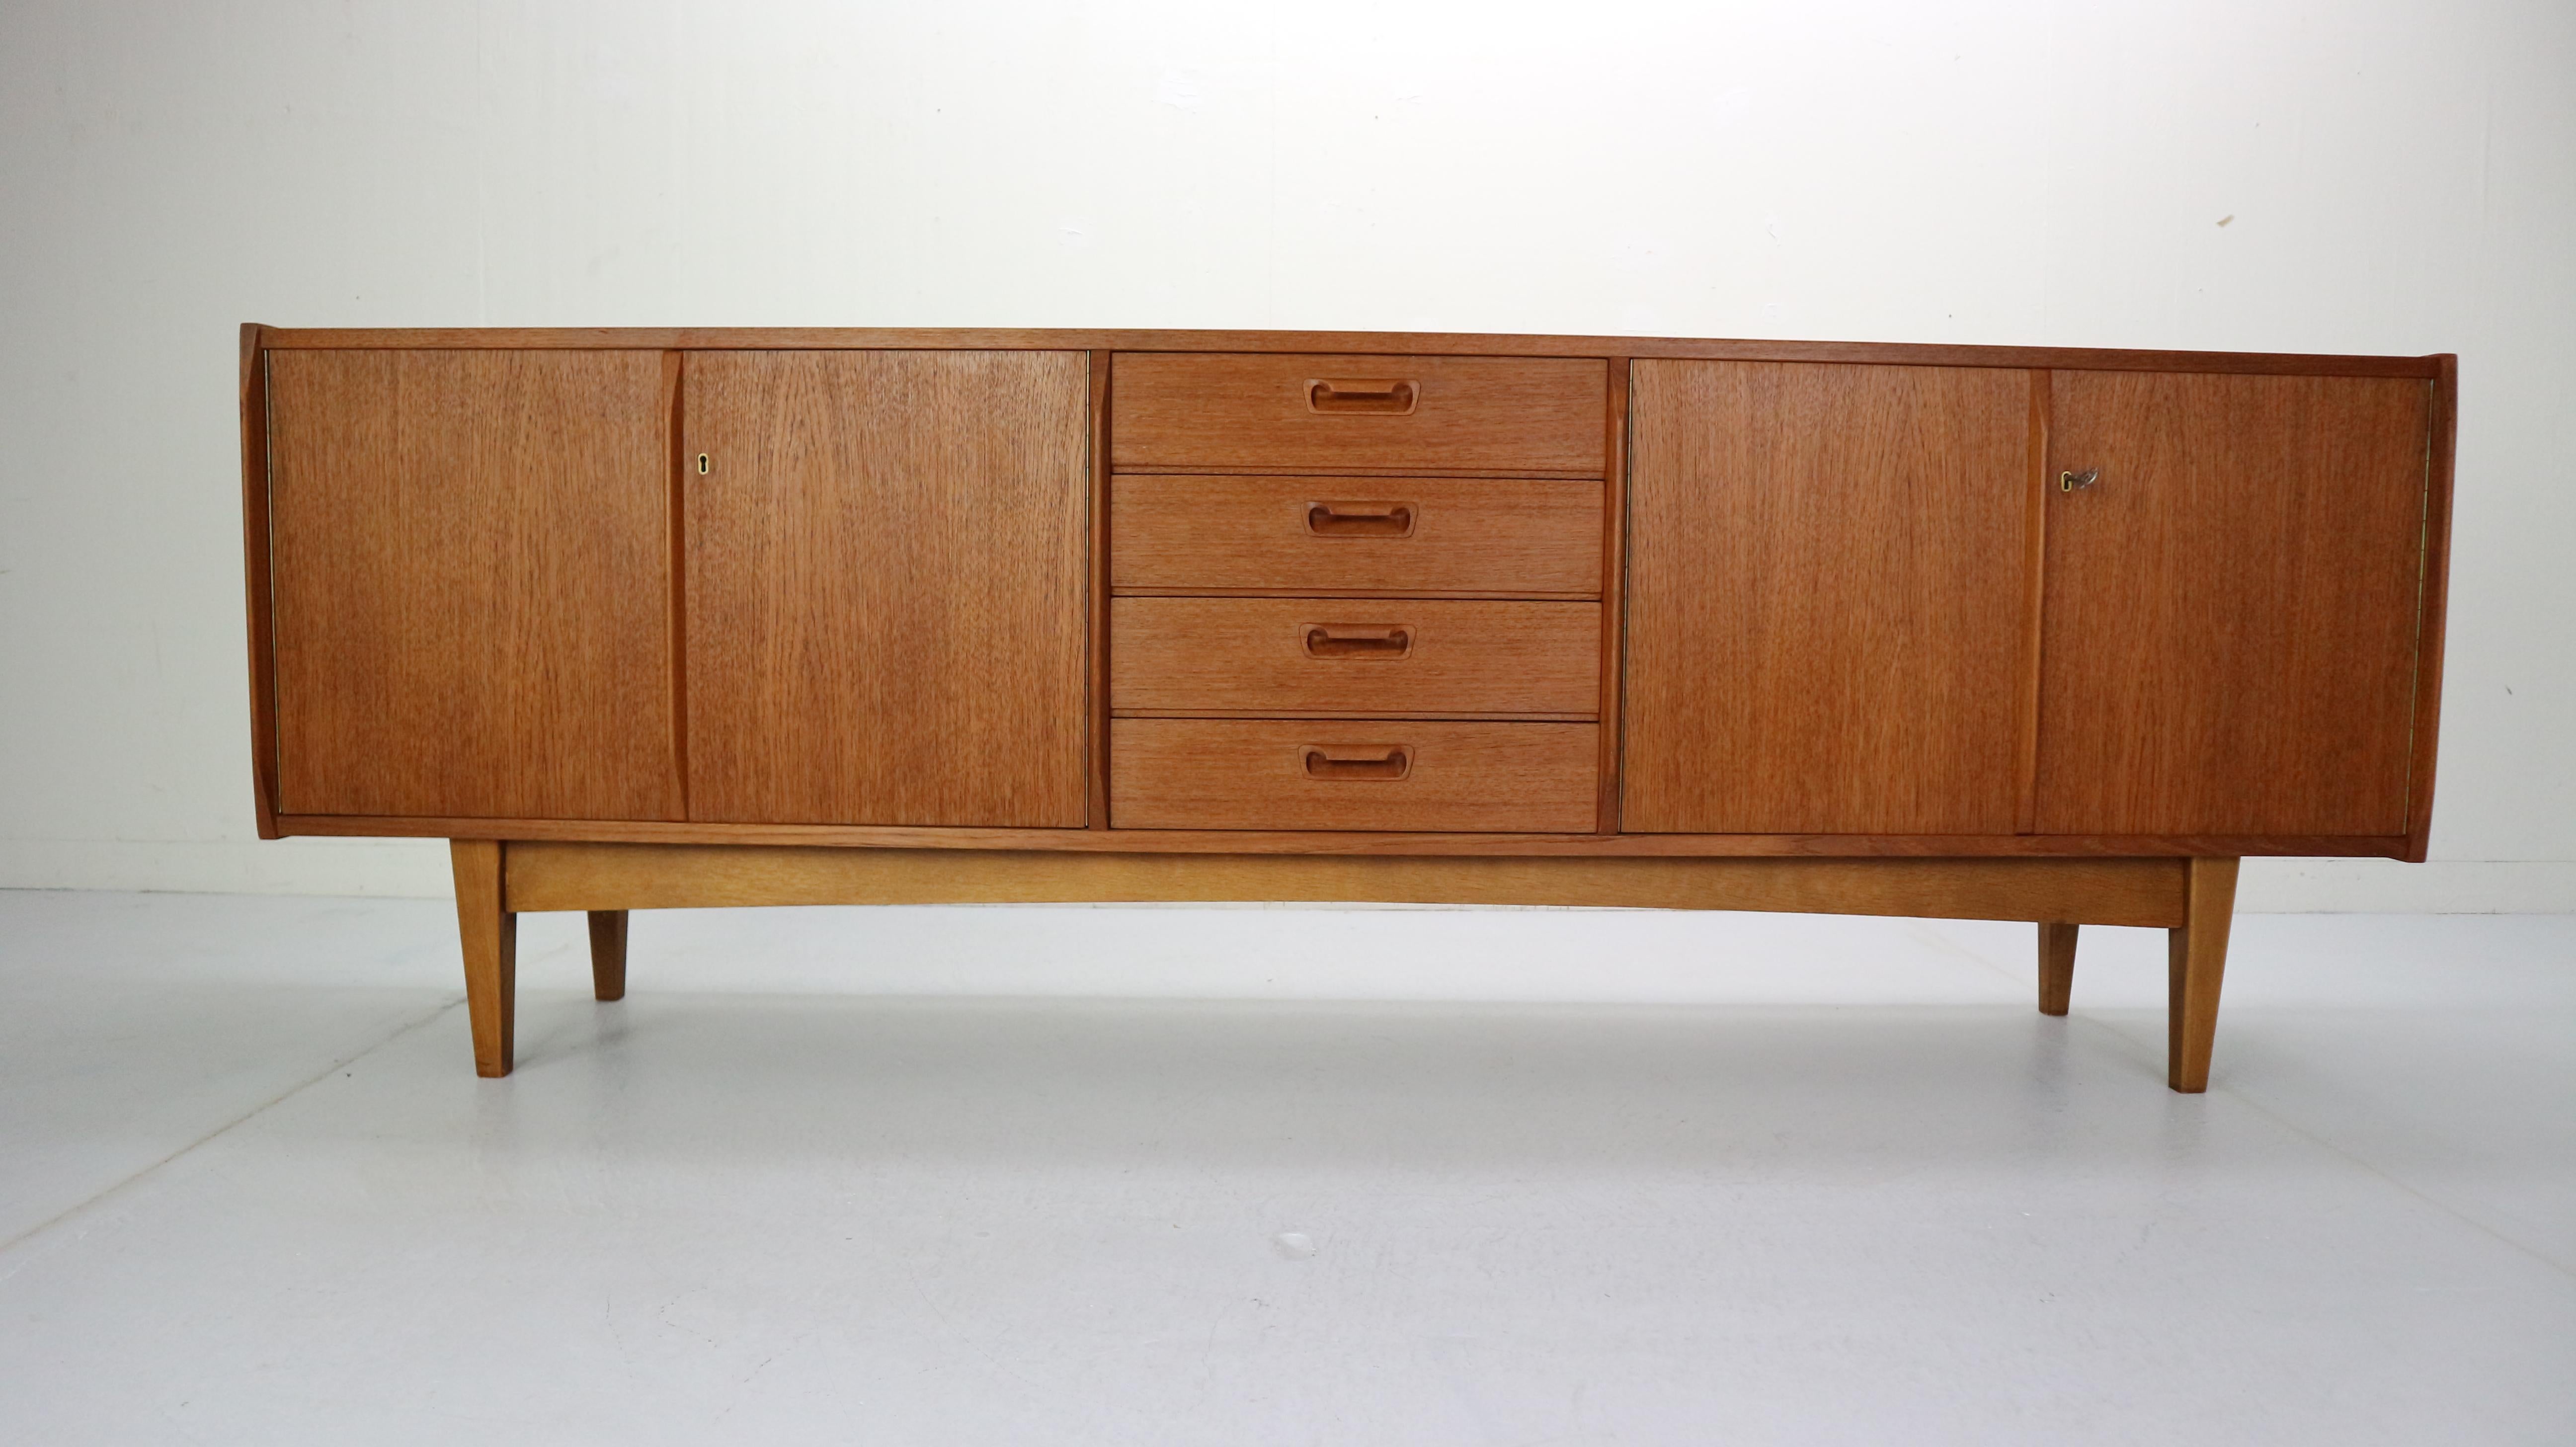 Beautifully curved Danish design sideboard made in 1960s, Denmark.
It's made of teak wood and has an original key and two locks on both sides.
220cm long sideboard has plenty storage for your items and unique accent for your vintage and modern